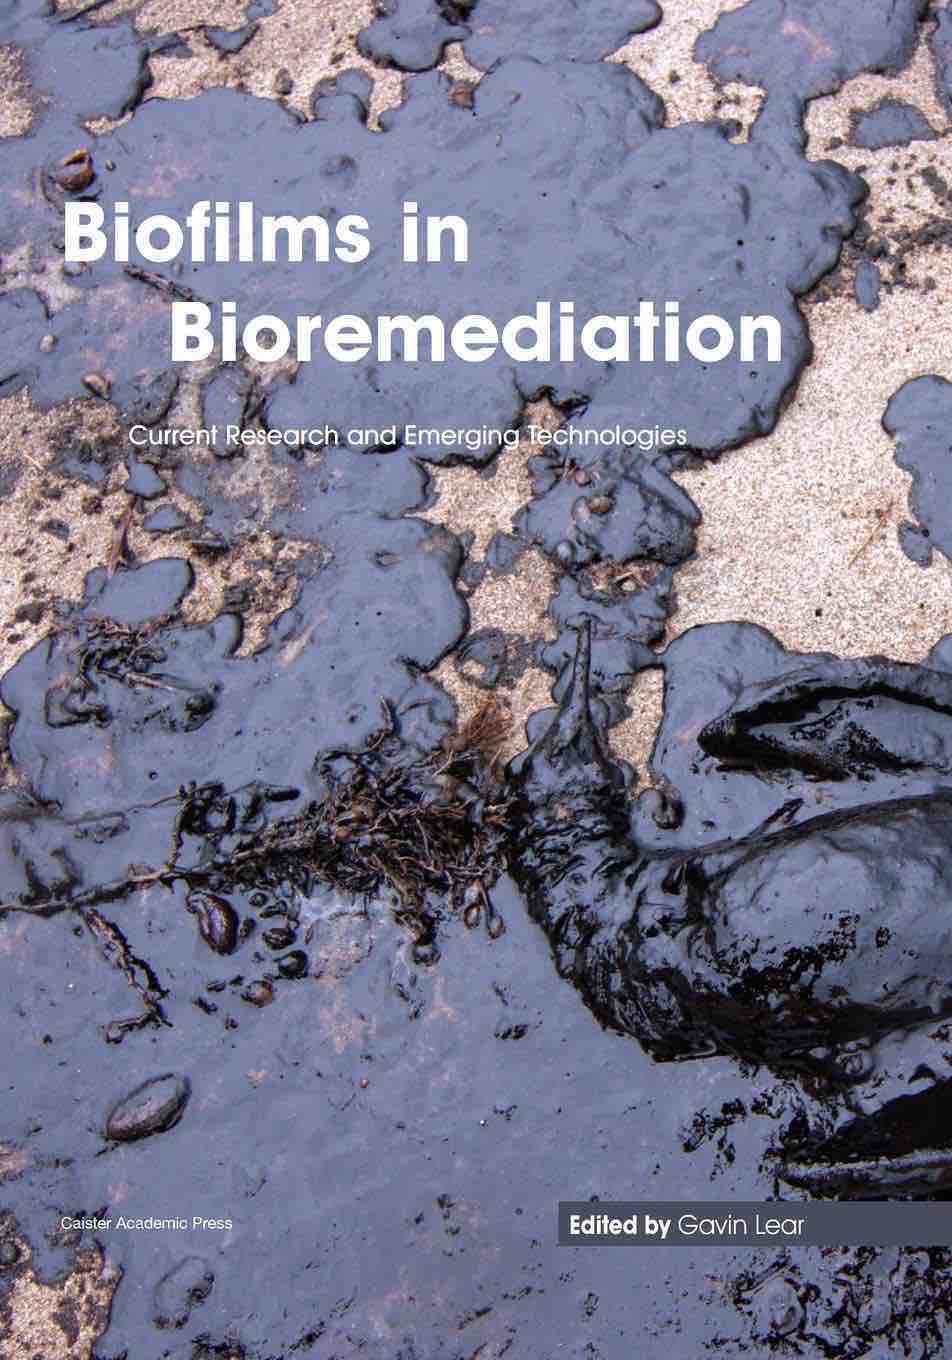 Biofilms in Bioremediation: Current Research and Emerging Technologies